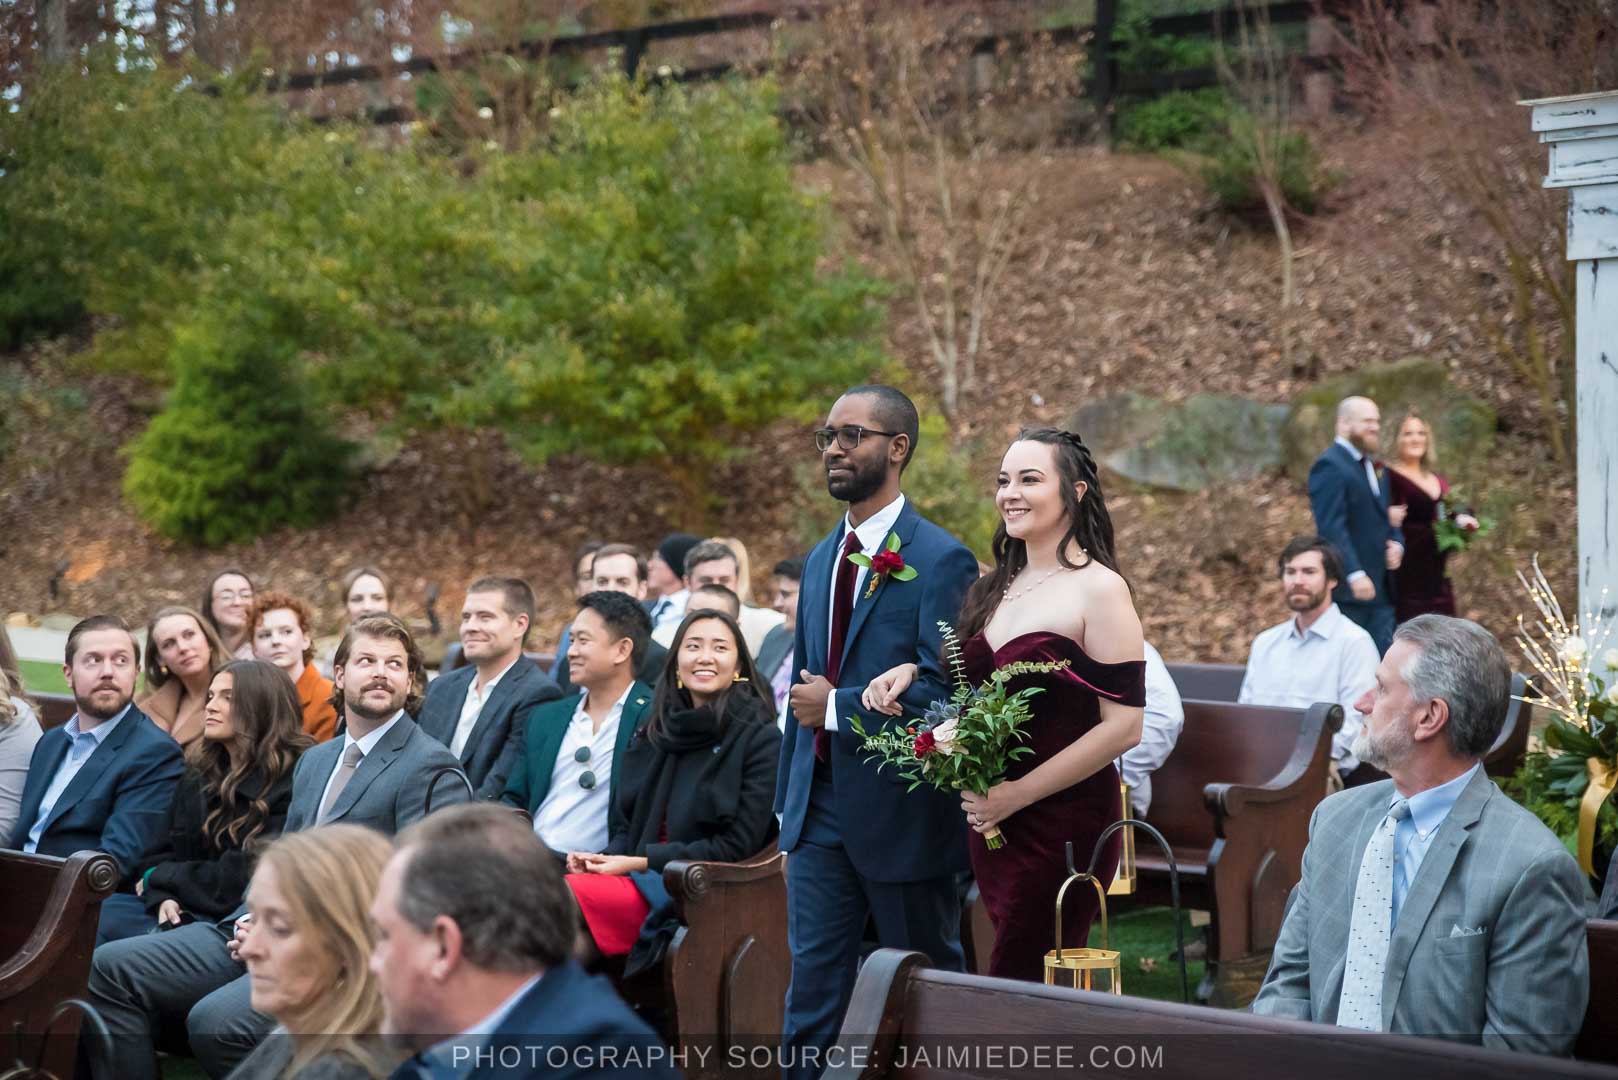 Rocky's Lake Estate Wedding Venue - Wedding ceremony - guests seated in outdoor pew benches with bridal party walking down the aisle